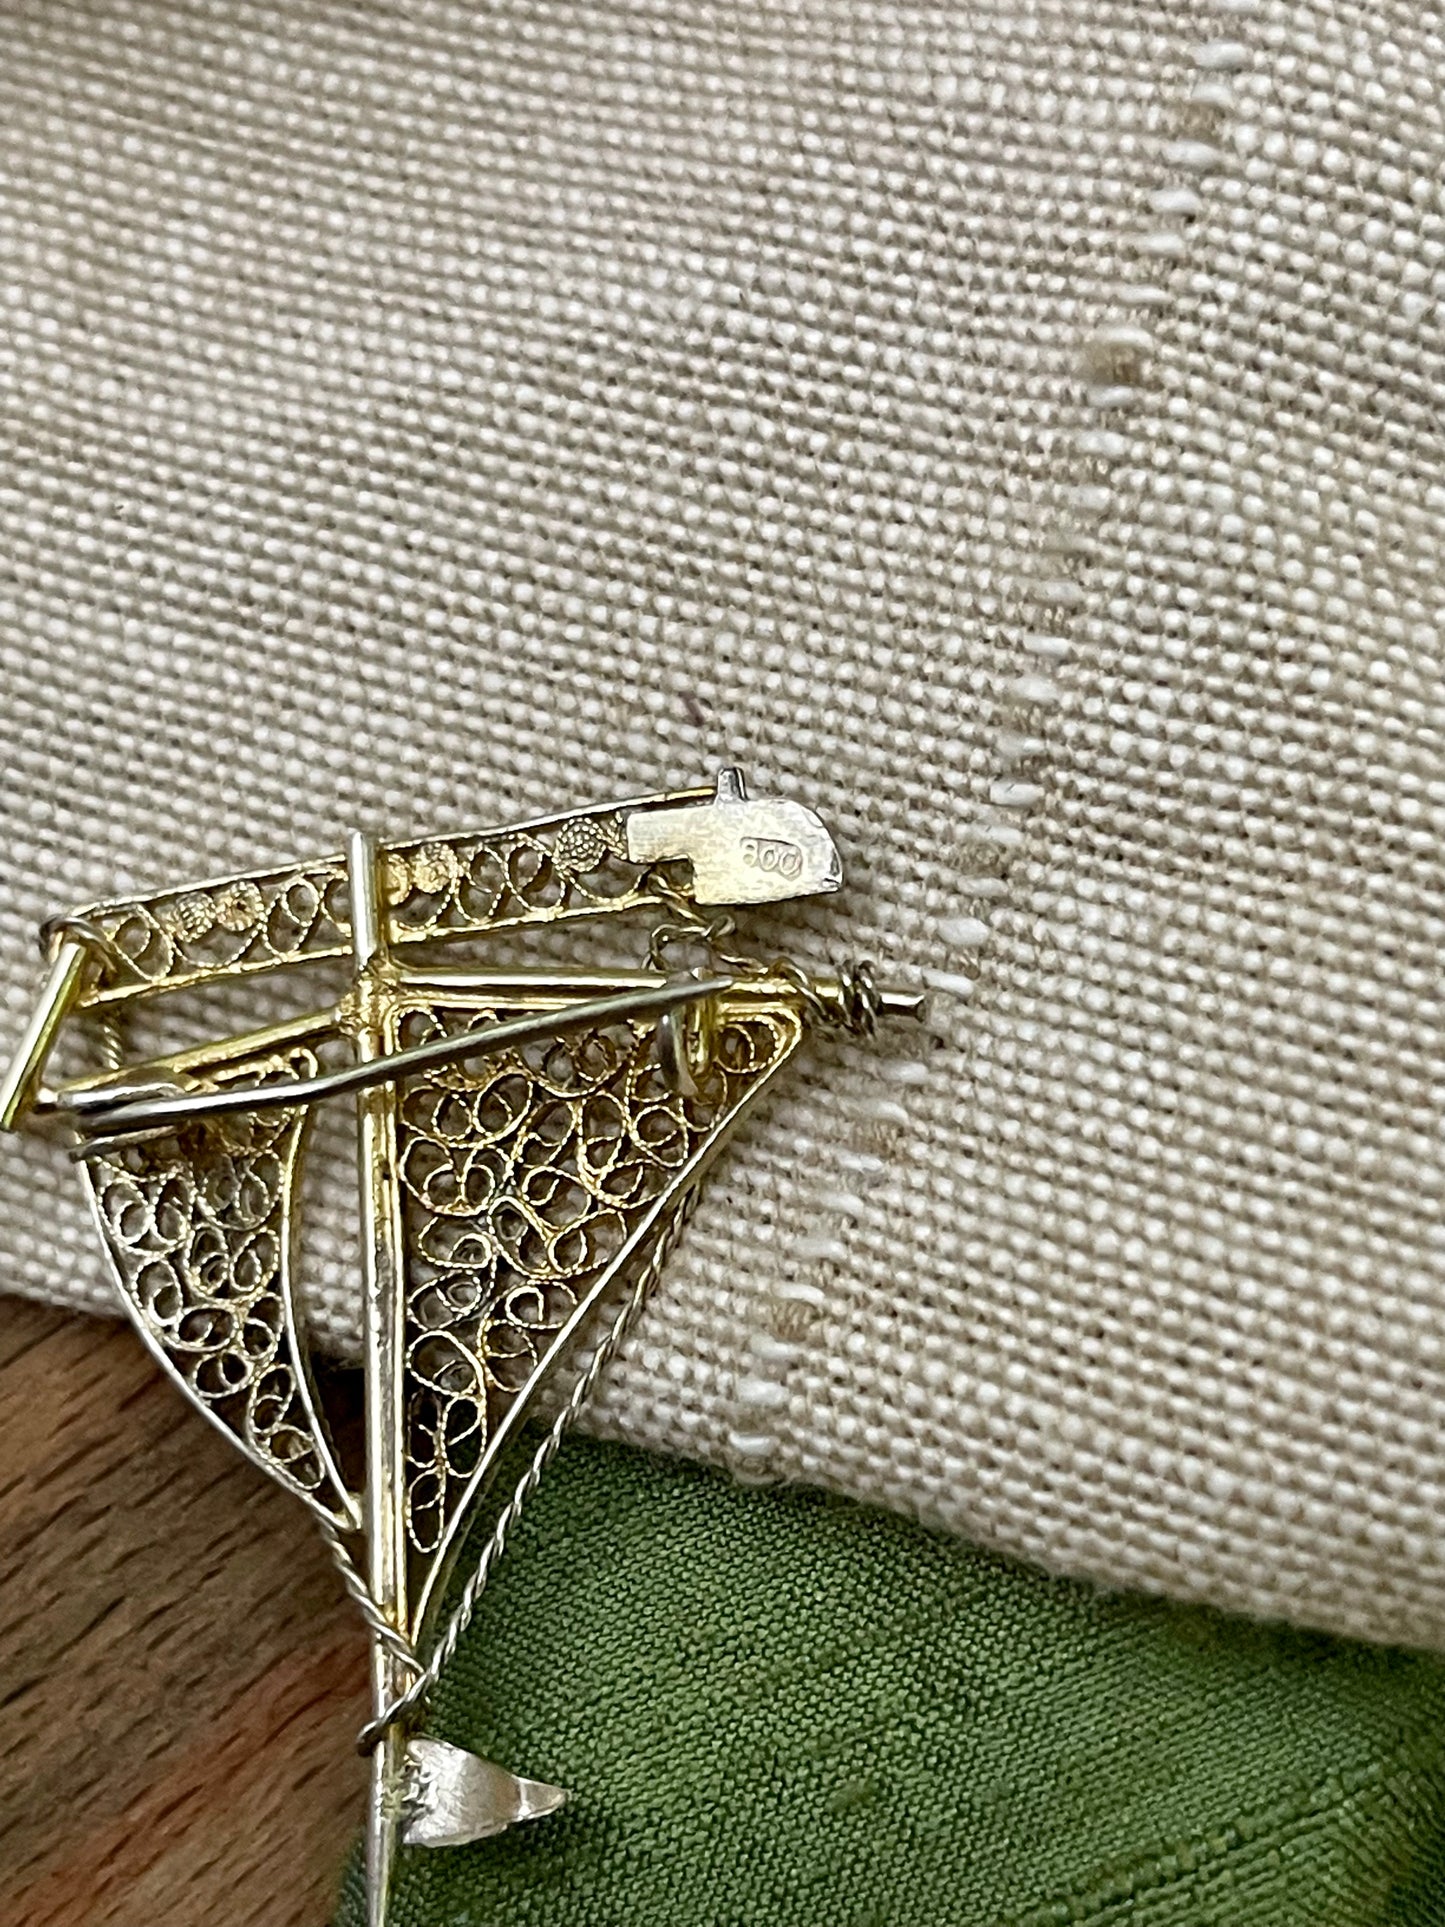 Lovely Boat Sailing Brooch Sterling 925 Silver Vintage Retro Jewellery1950s